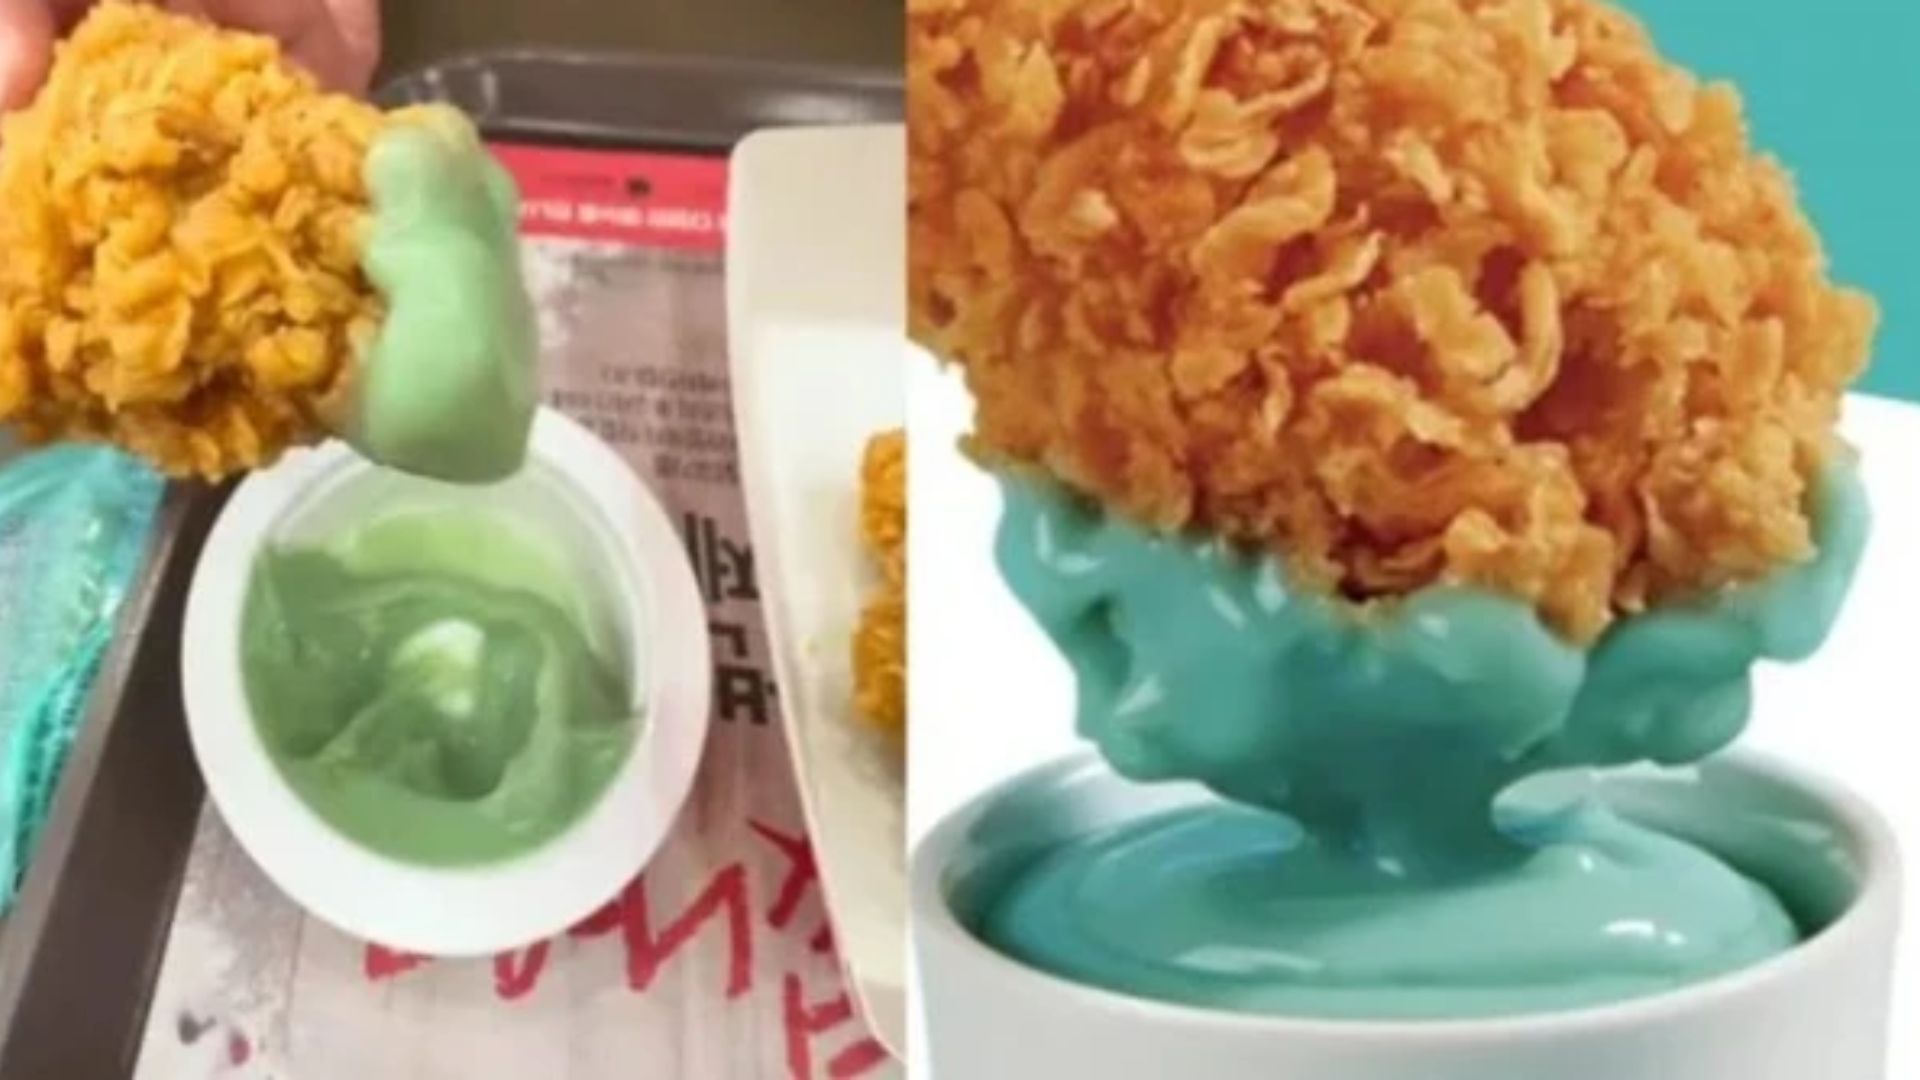 KFC South Korea dispatches blue mint chocolate dipping sauce for chicken